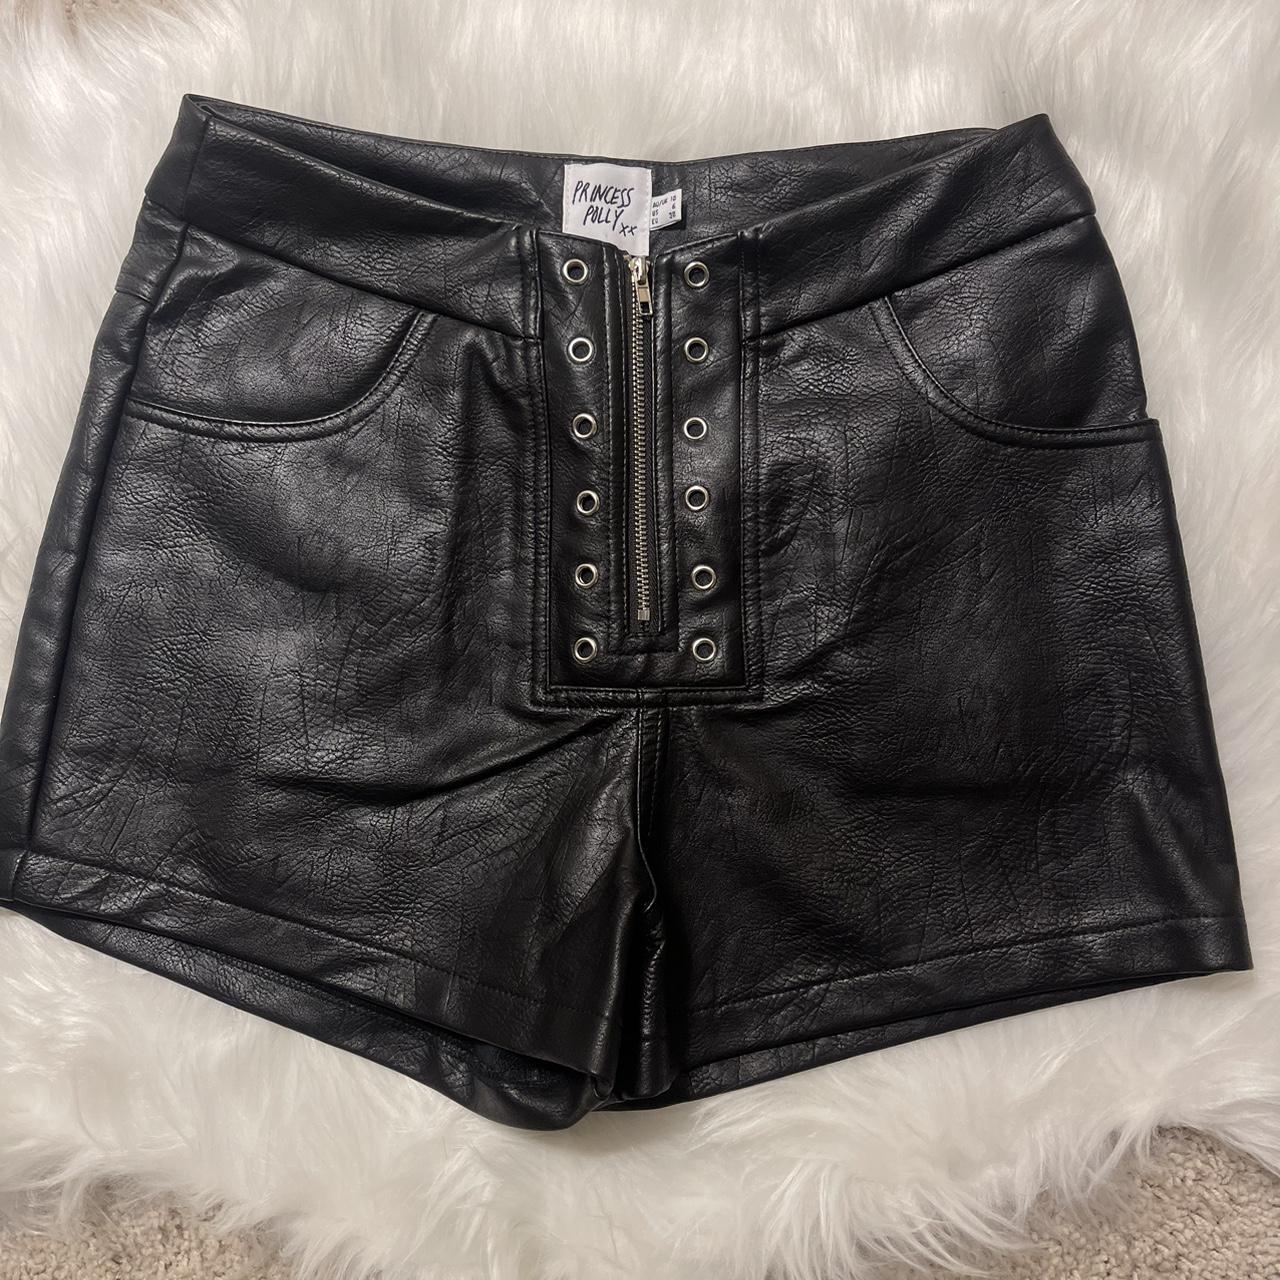 never worn black leather shorts from princess polly! - Depop